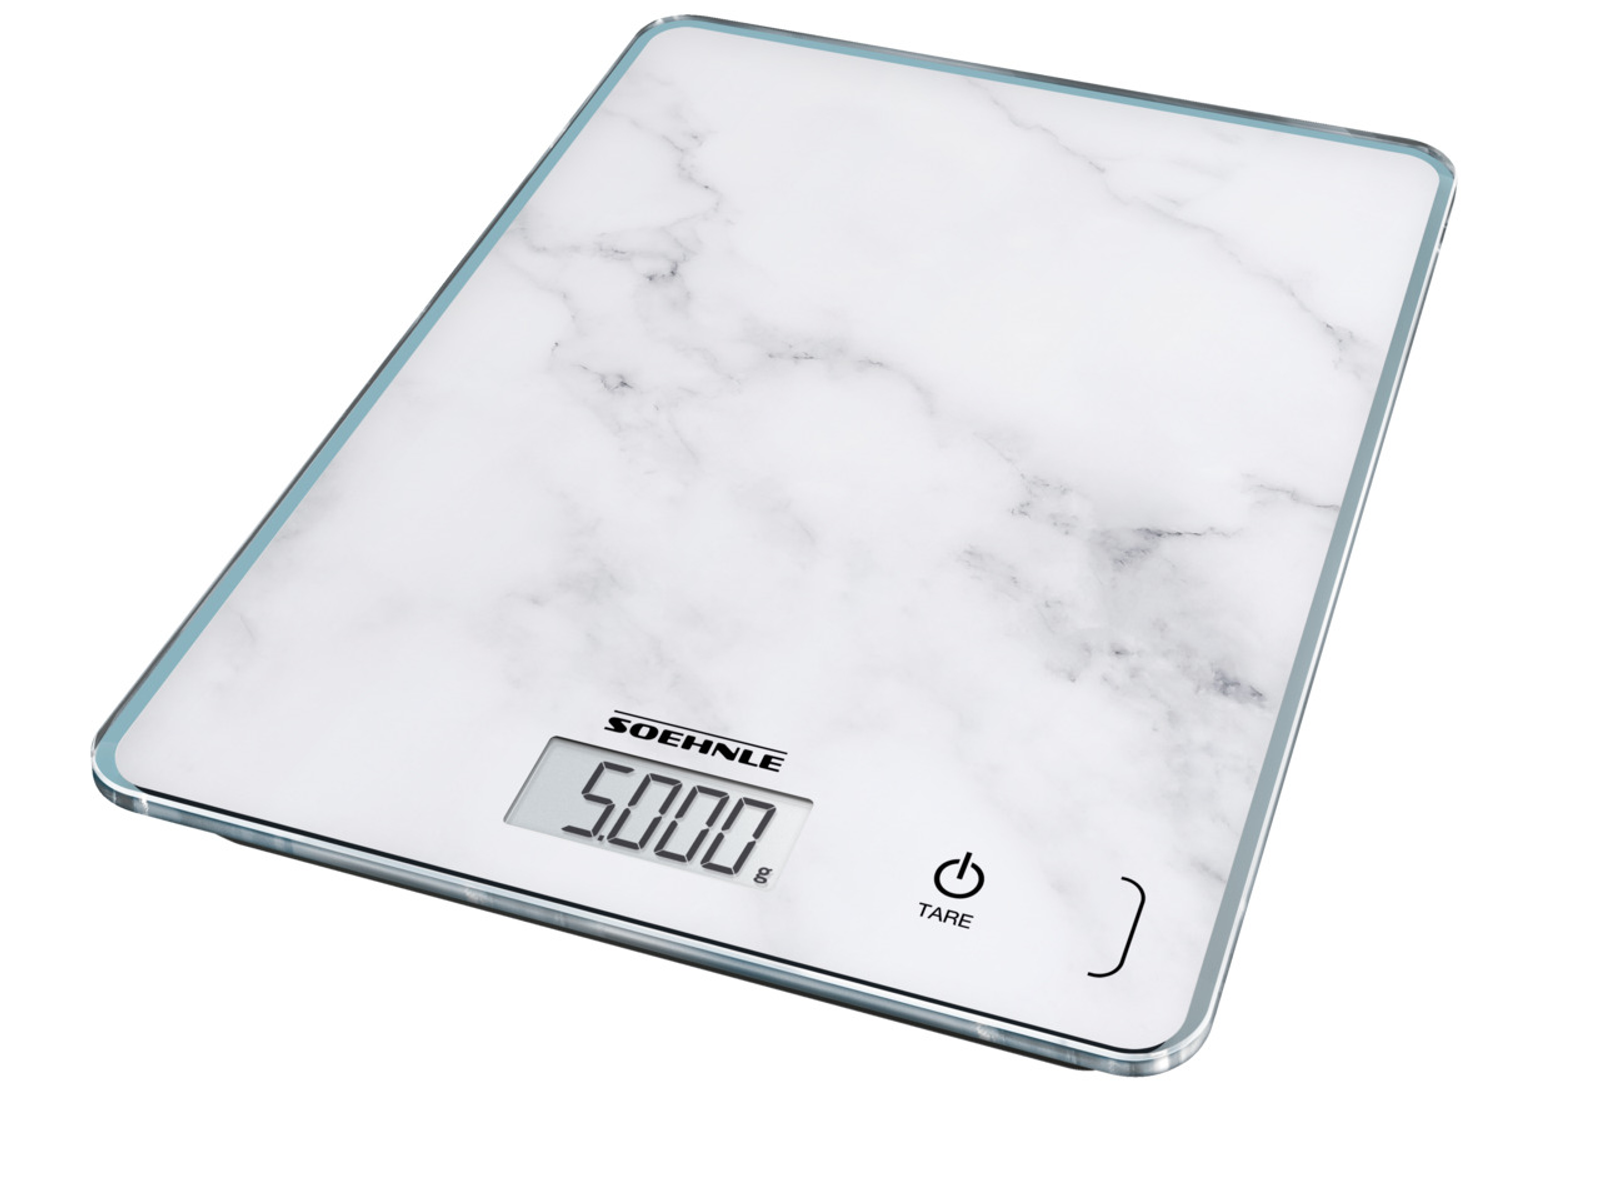 61516 Küchenwaage COMPACT 5 (Max. kg 300 PAGE Tragkraft: SOEHNLE MARBLE